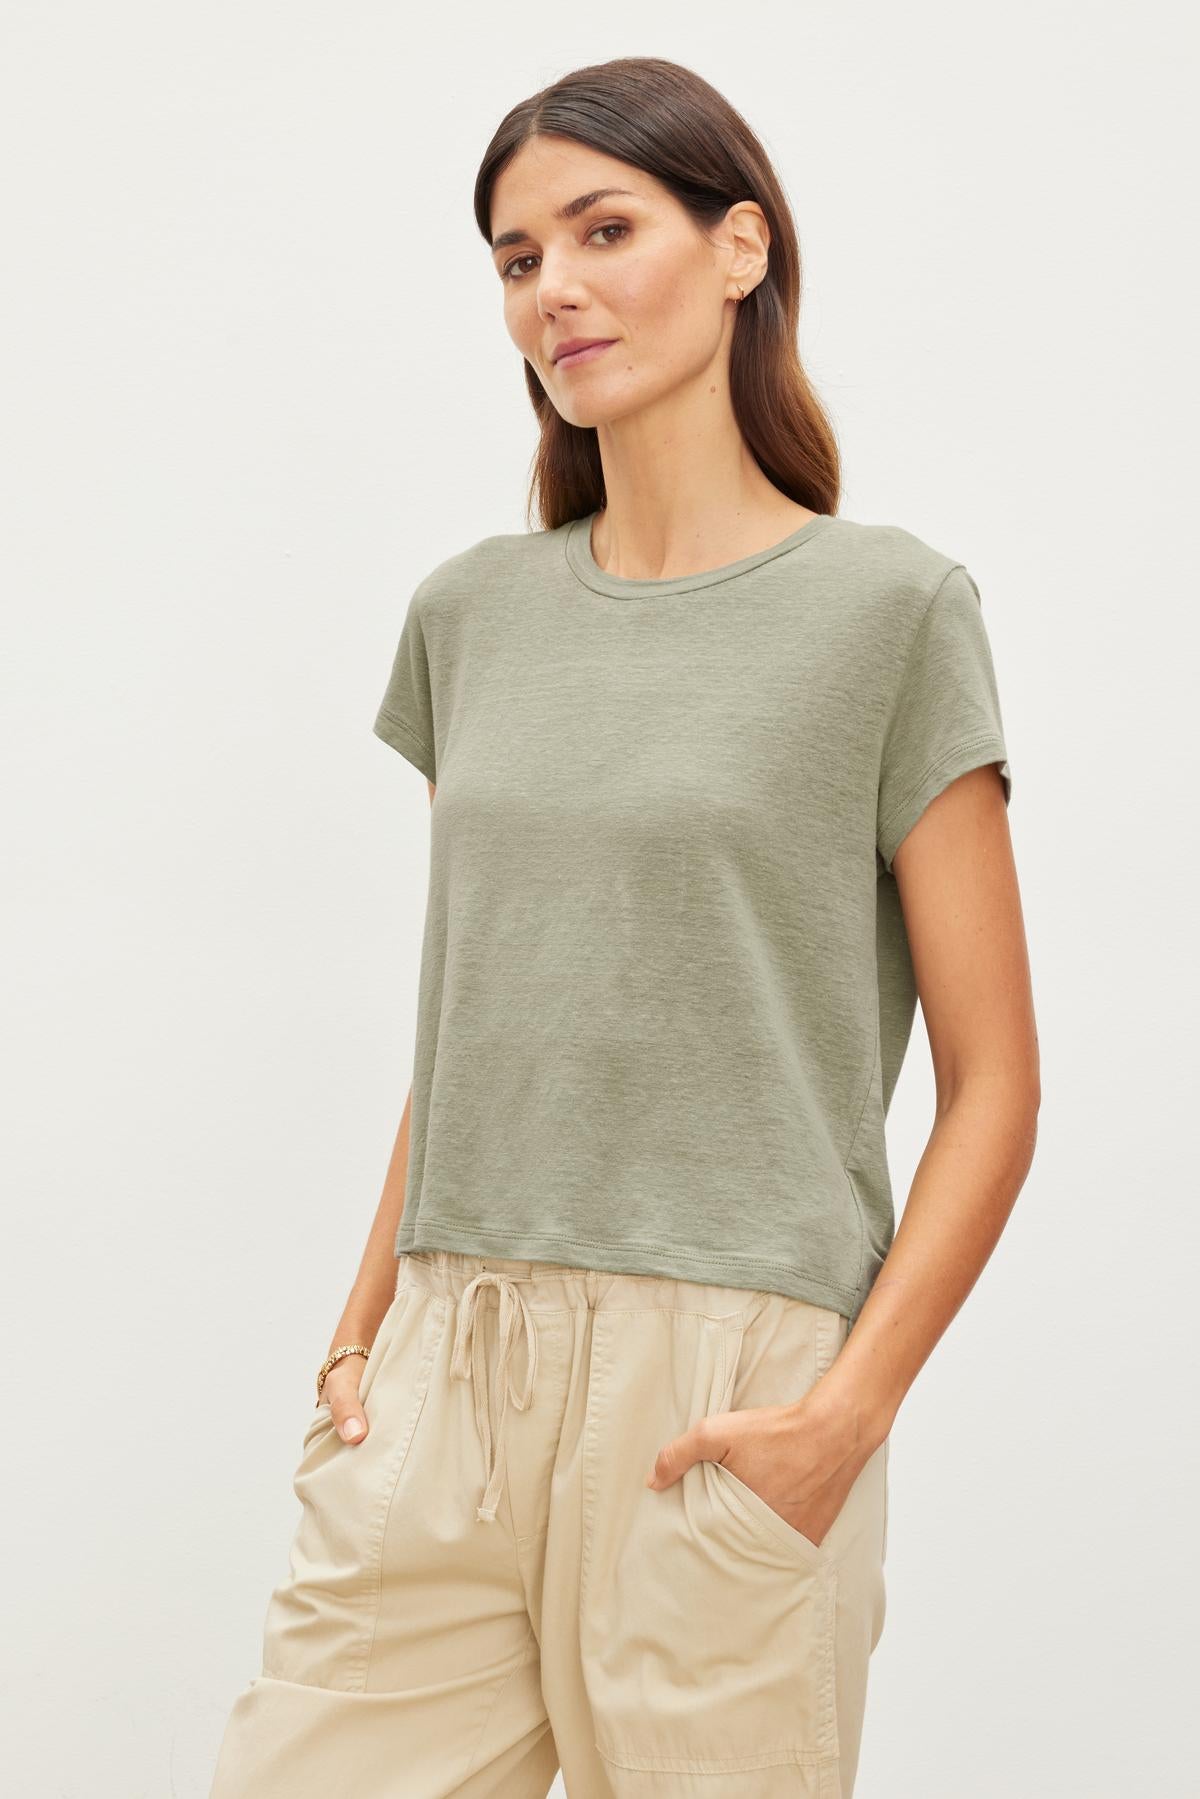 A woman in a Velvet by Graham & Spencer CASEY LINEN KNIT CREW NECK TEE and beige drawstring pants stands with her hands in her pockets, looking at the camera with a subtle expression.-36909994082497